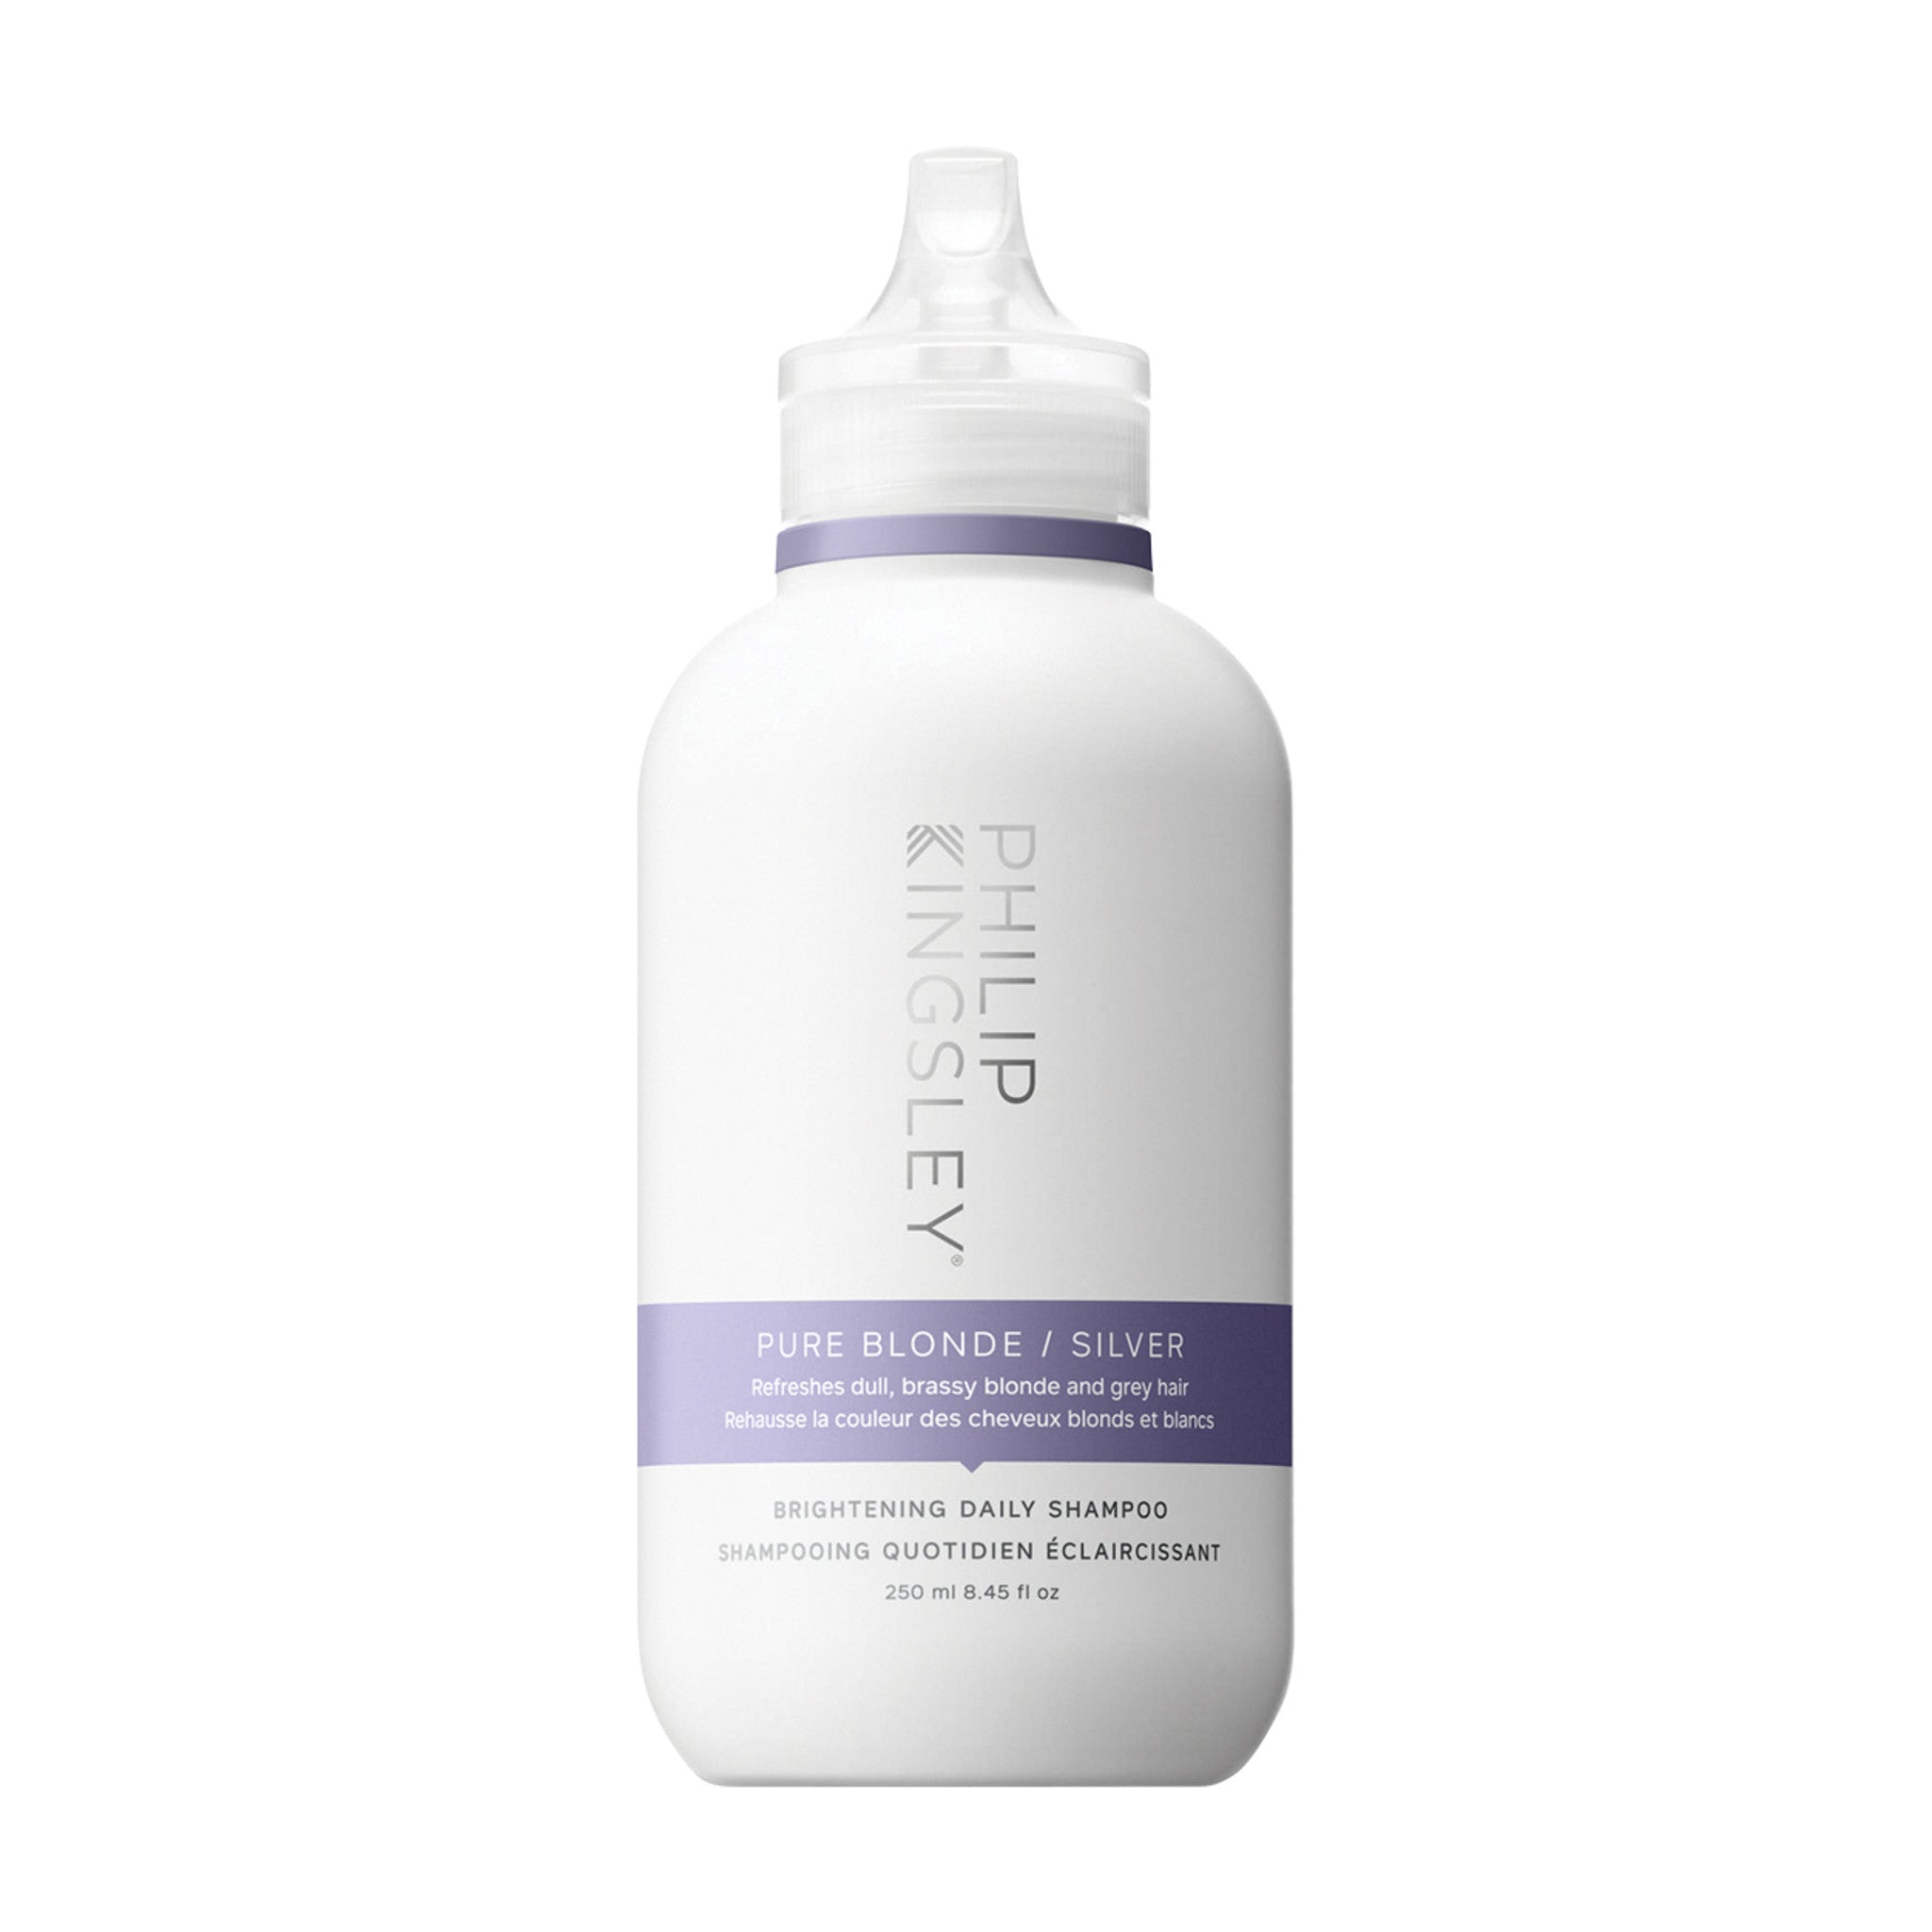 Philip Kingsley Pure Blonde/Silver Brightening Daily Shampoo Size variant: 8.45 fl oz | 250 ml main image. This product is for blonde hair